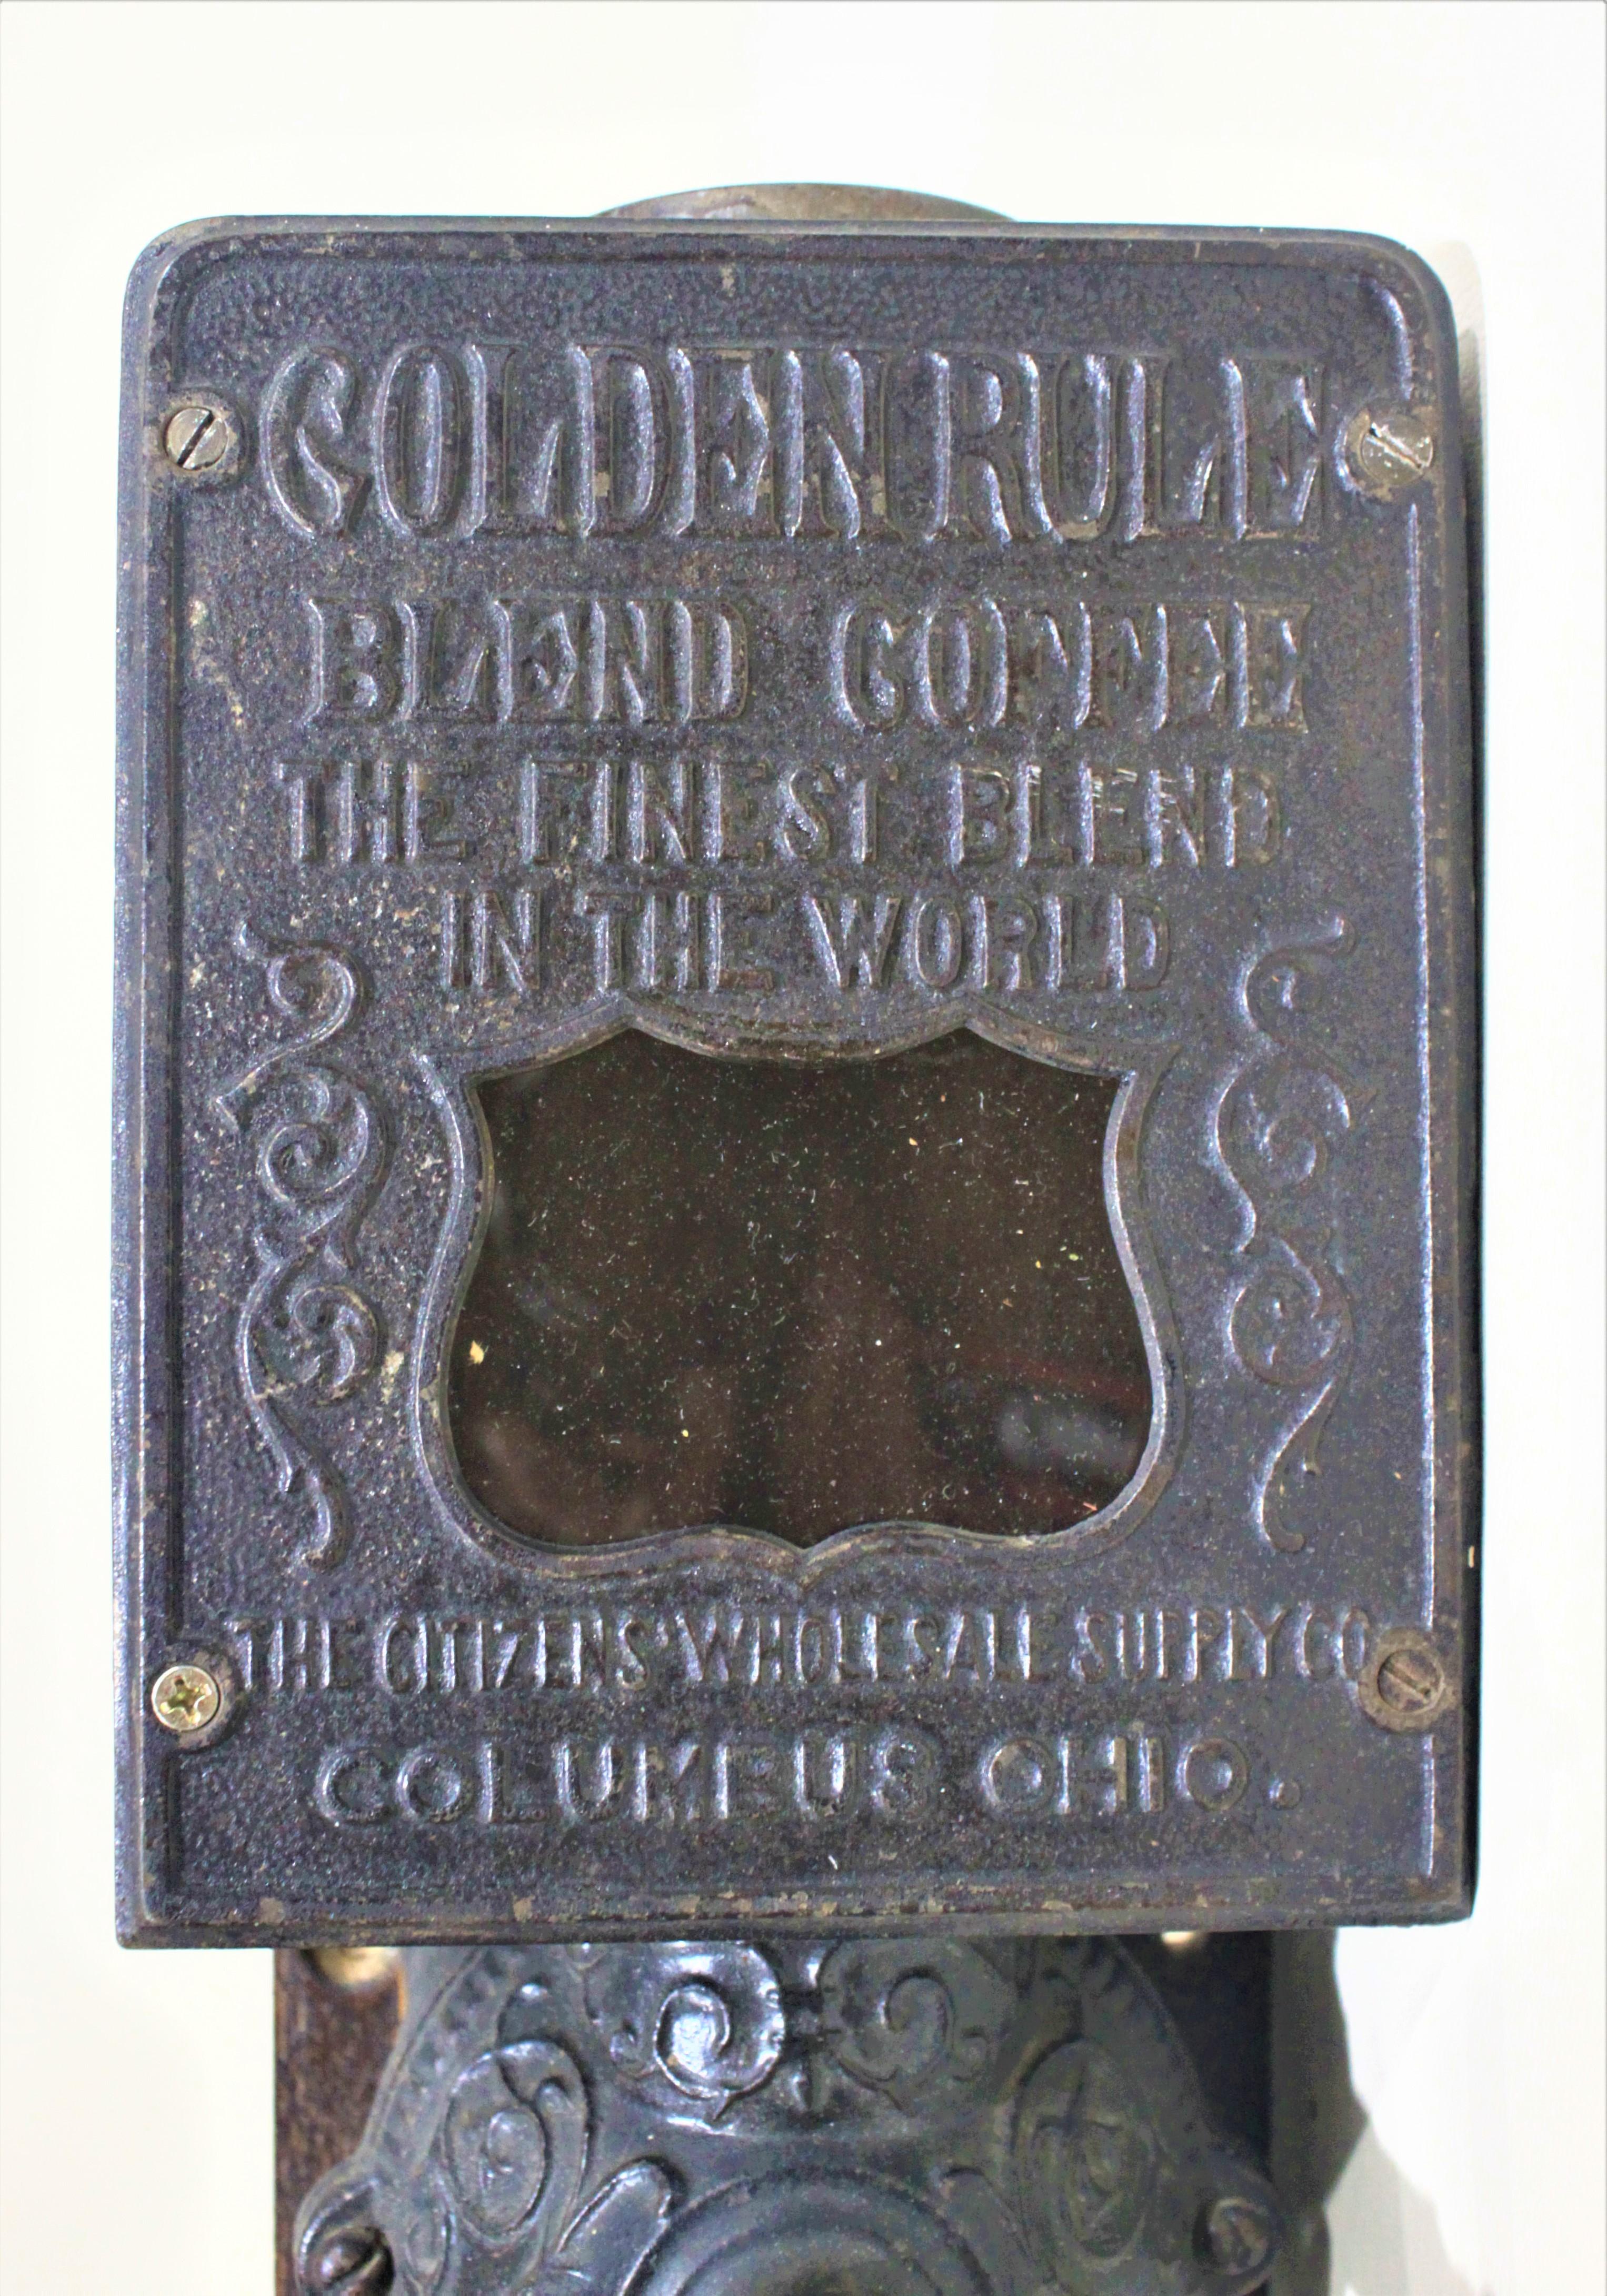 This antique cast iron and wooden wall mounted coffee grinder was made by the Arcade Manufacturing Company of Columbus Ohio and advertises 'Golden Rule' blended coffee. This coffee grinder is presumed to have been manufactured in the early 20th